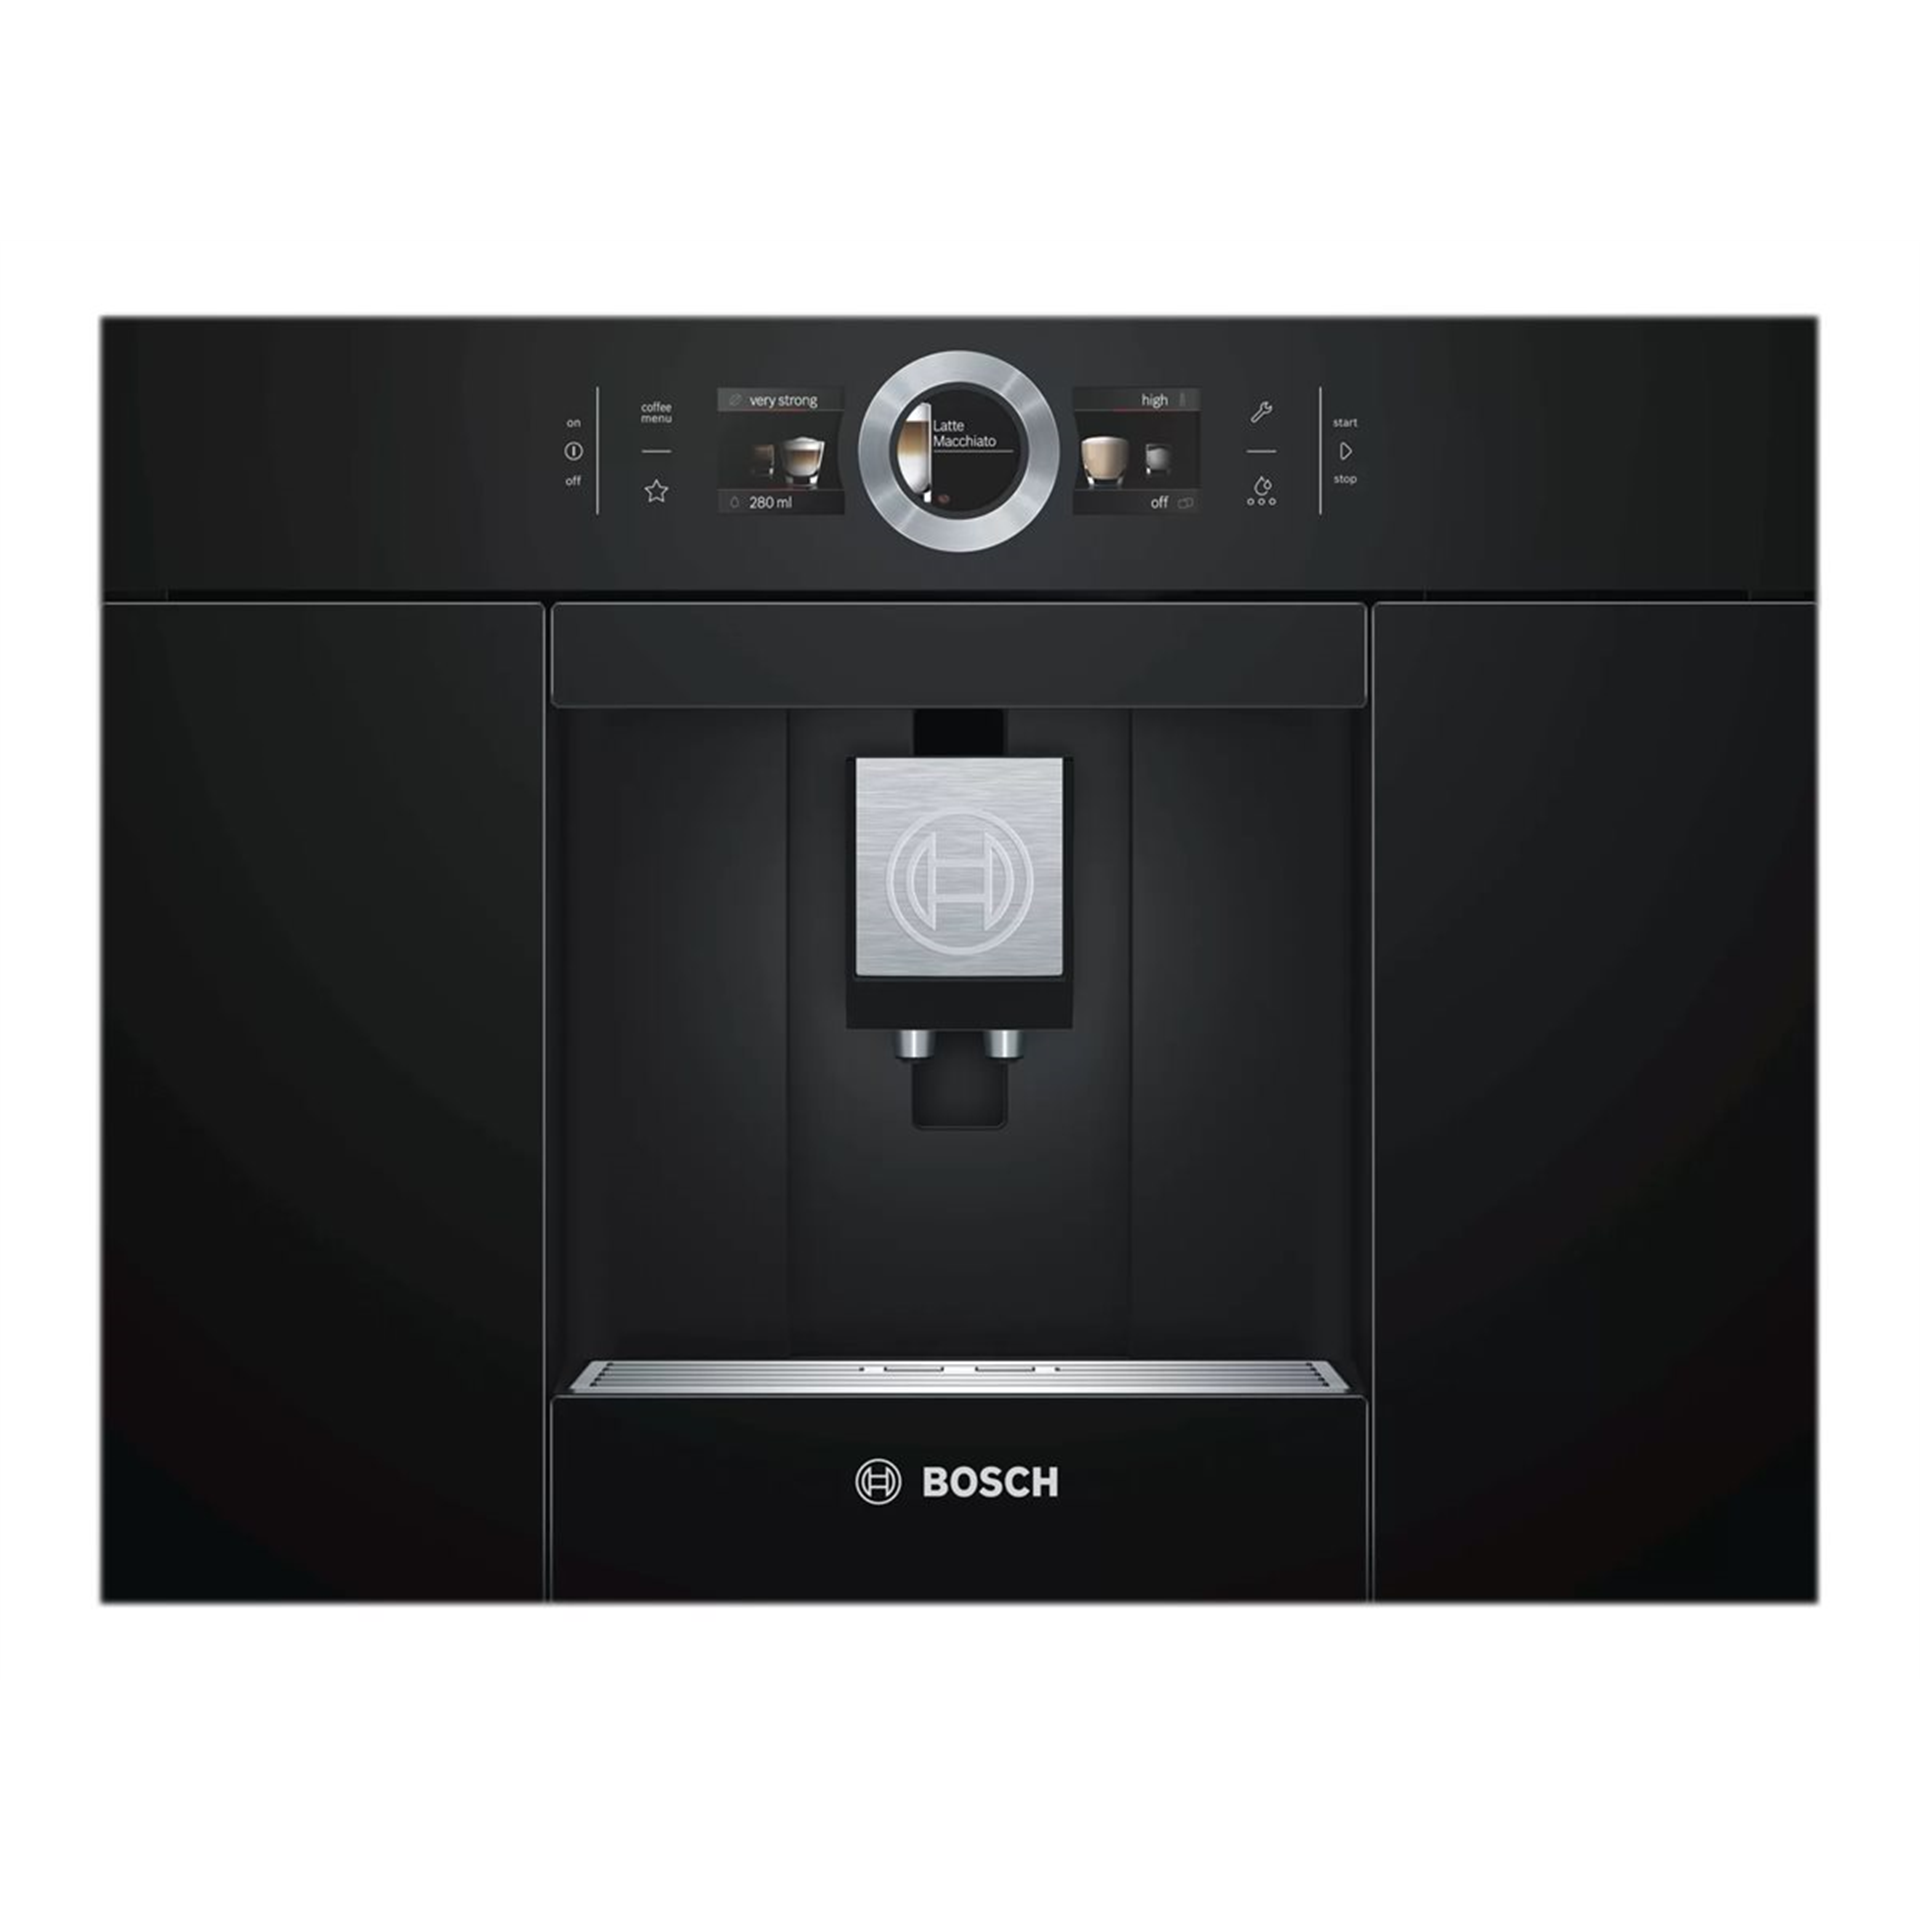 Bosch | Built-in Coffe machine with Home Connect | CTL636EB6 | Pump pressure 19 bar | Built-in milk frother | Fully automatic | 1600 W | Black